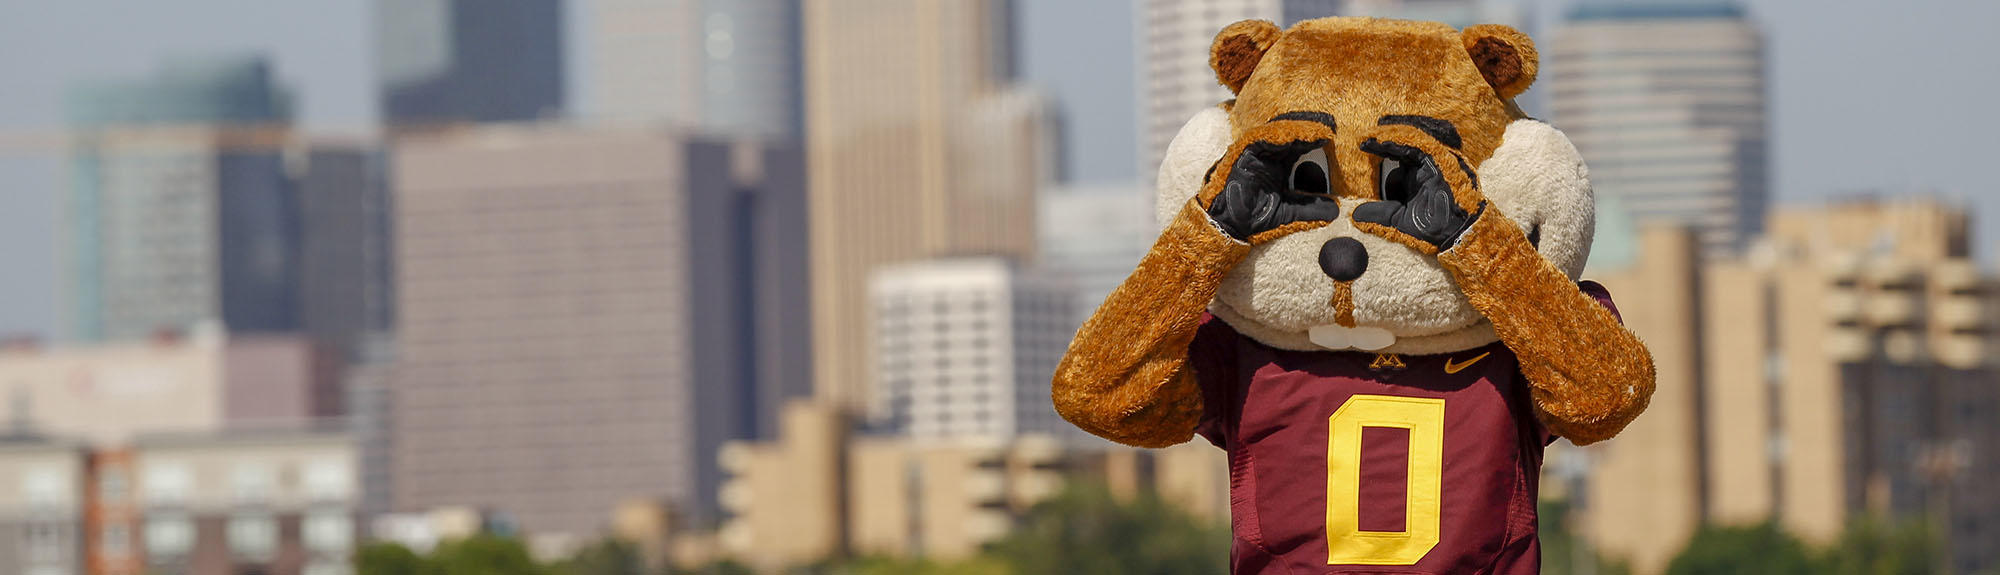 Goldy Gopher uses his hands as binoculars